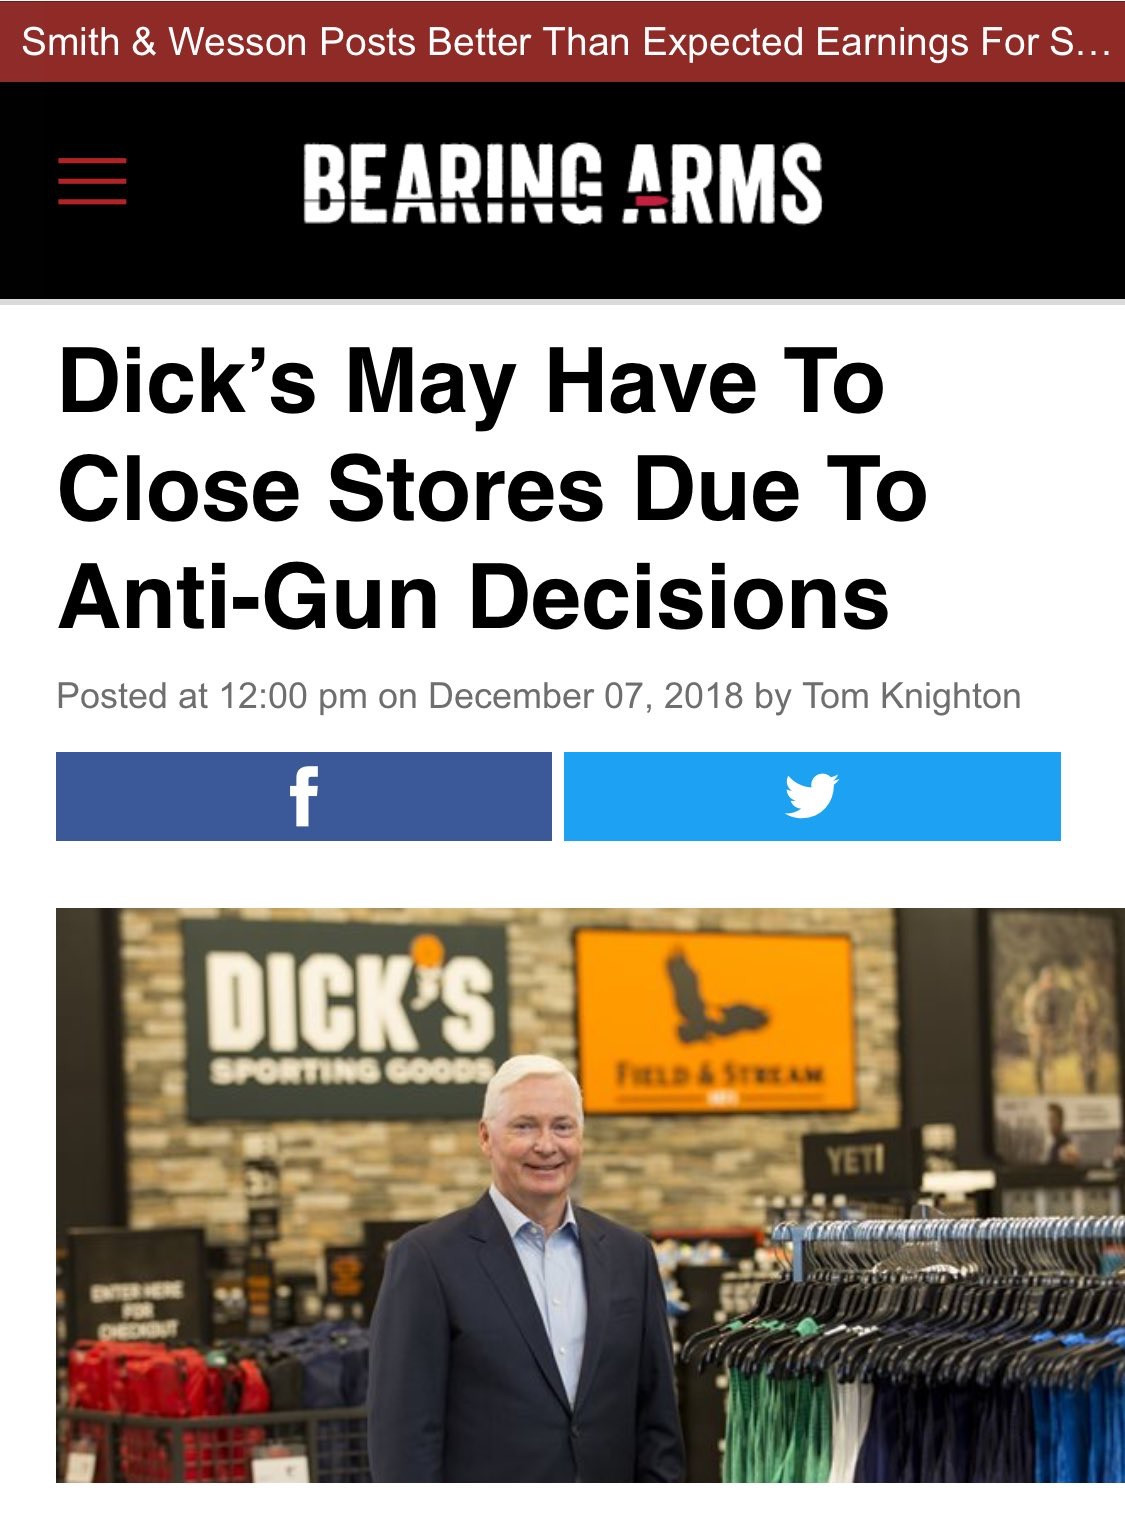 memes - display advertising - Smith & Wesson Posts Better Than Expected Earnings For S... Bearing Arms Dick's May Have To Close Stores Due To AntiGun Decisions Posted at on by Tom Knighton Dick'S Sporting Yeti